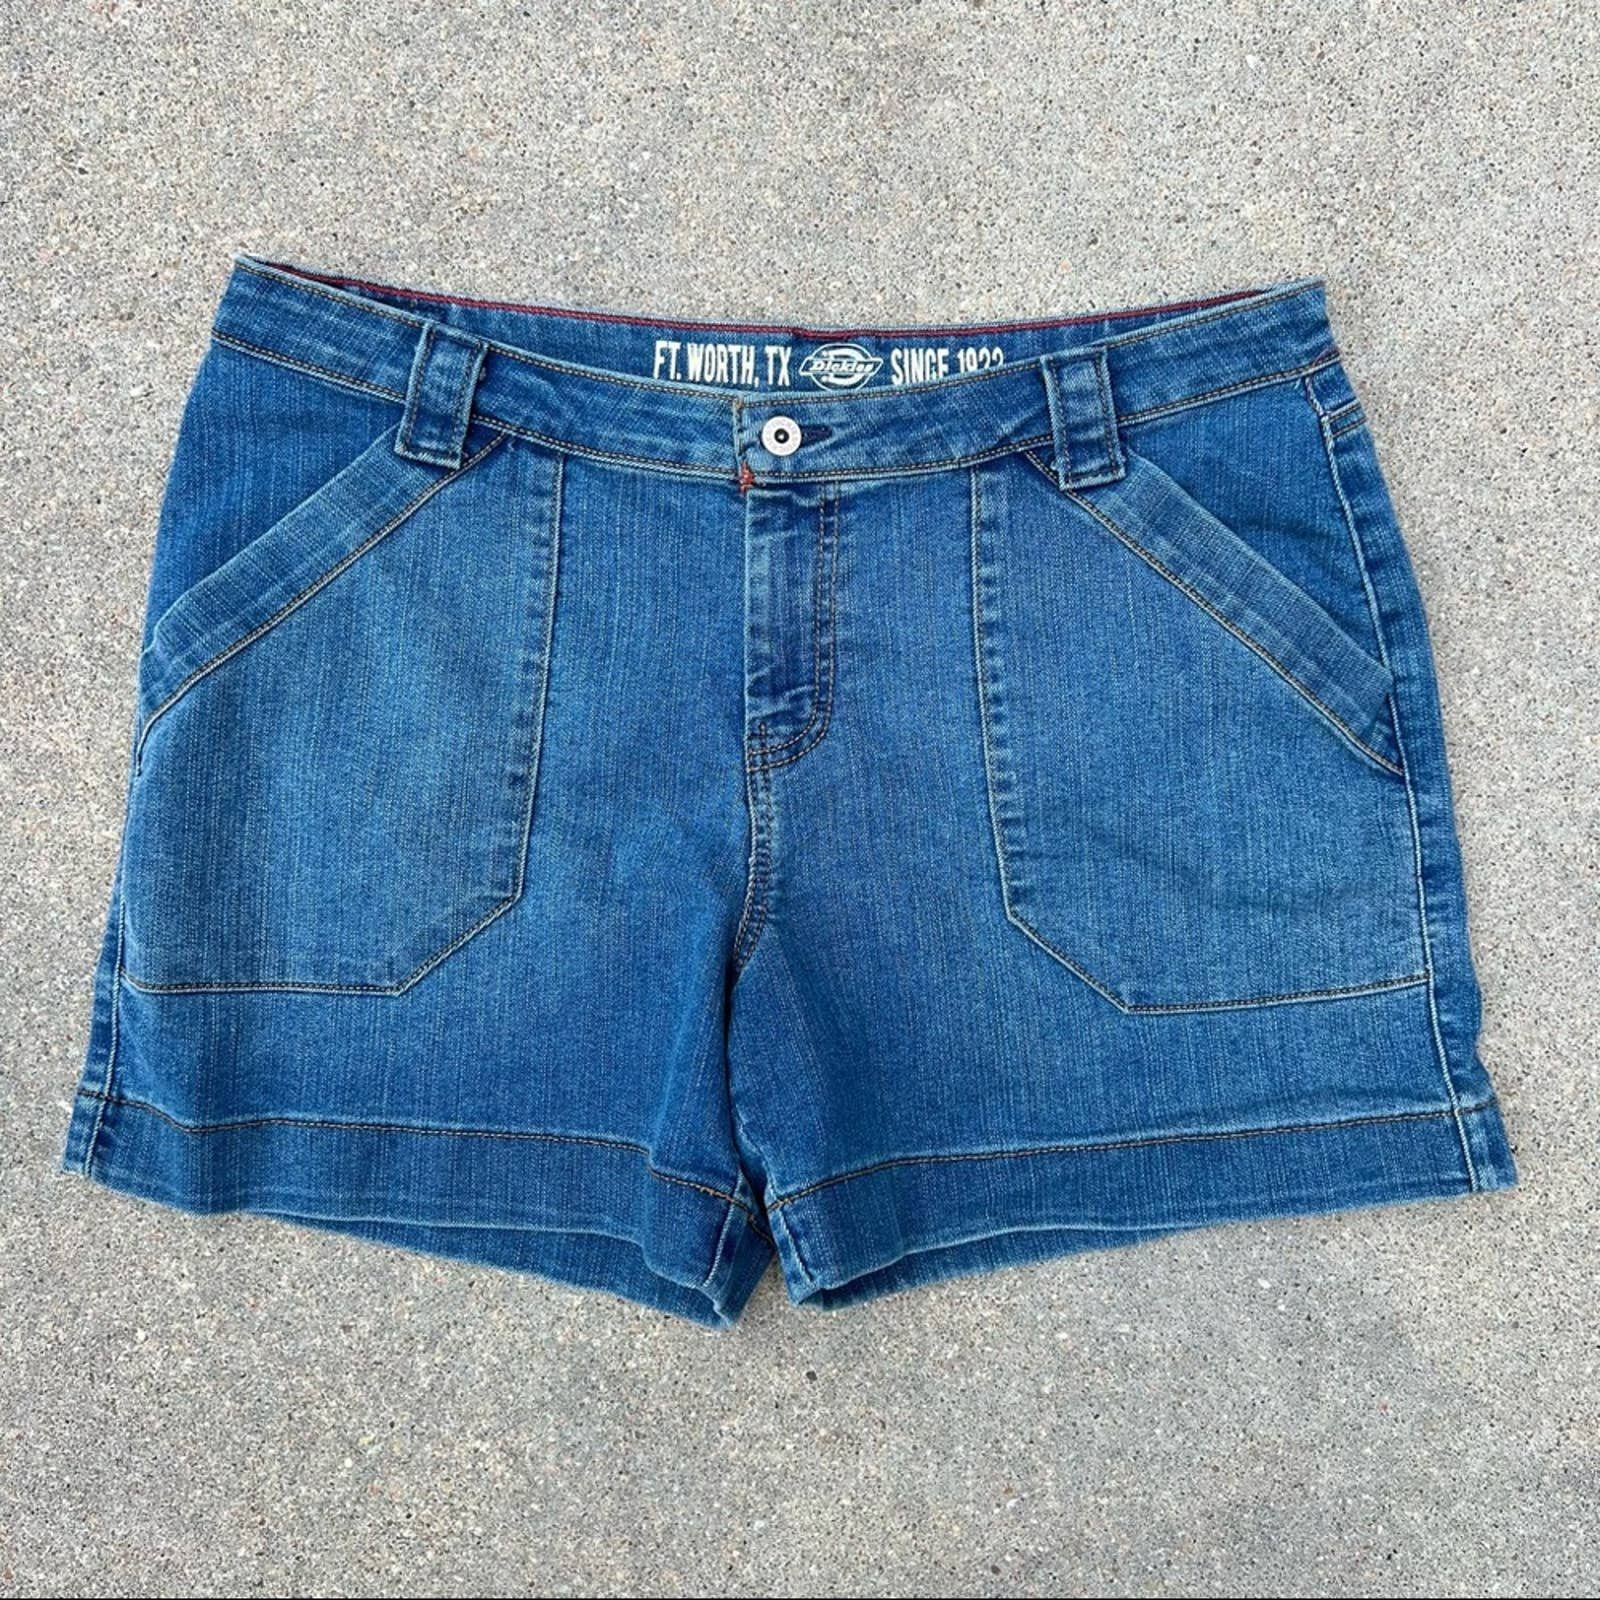 Dickies Dickies utility square pocket carpenter style jean shorts | Grailed